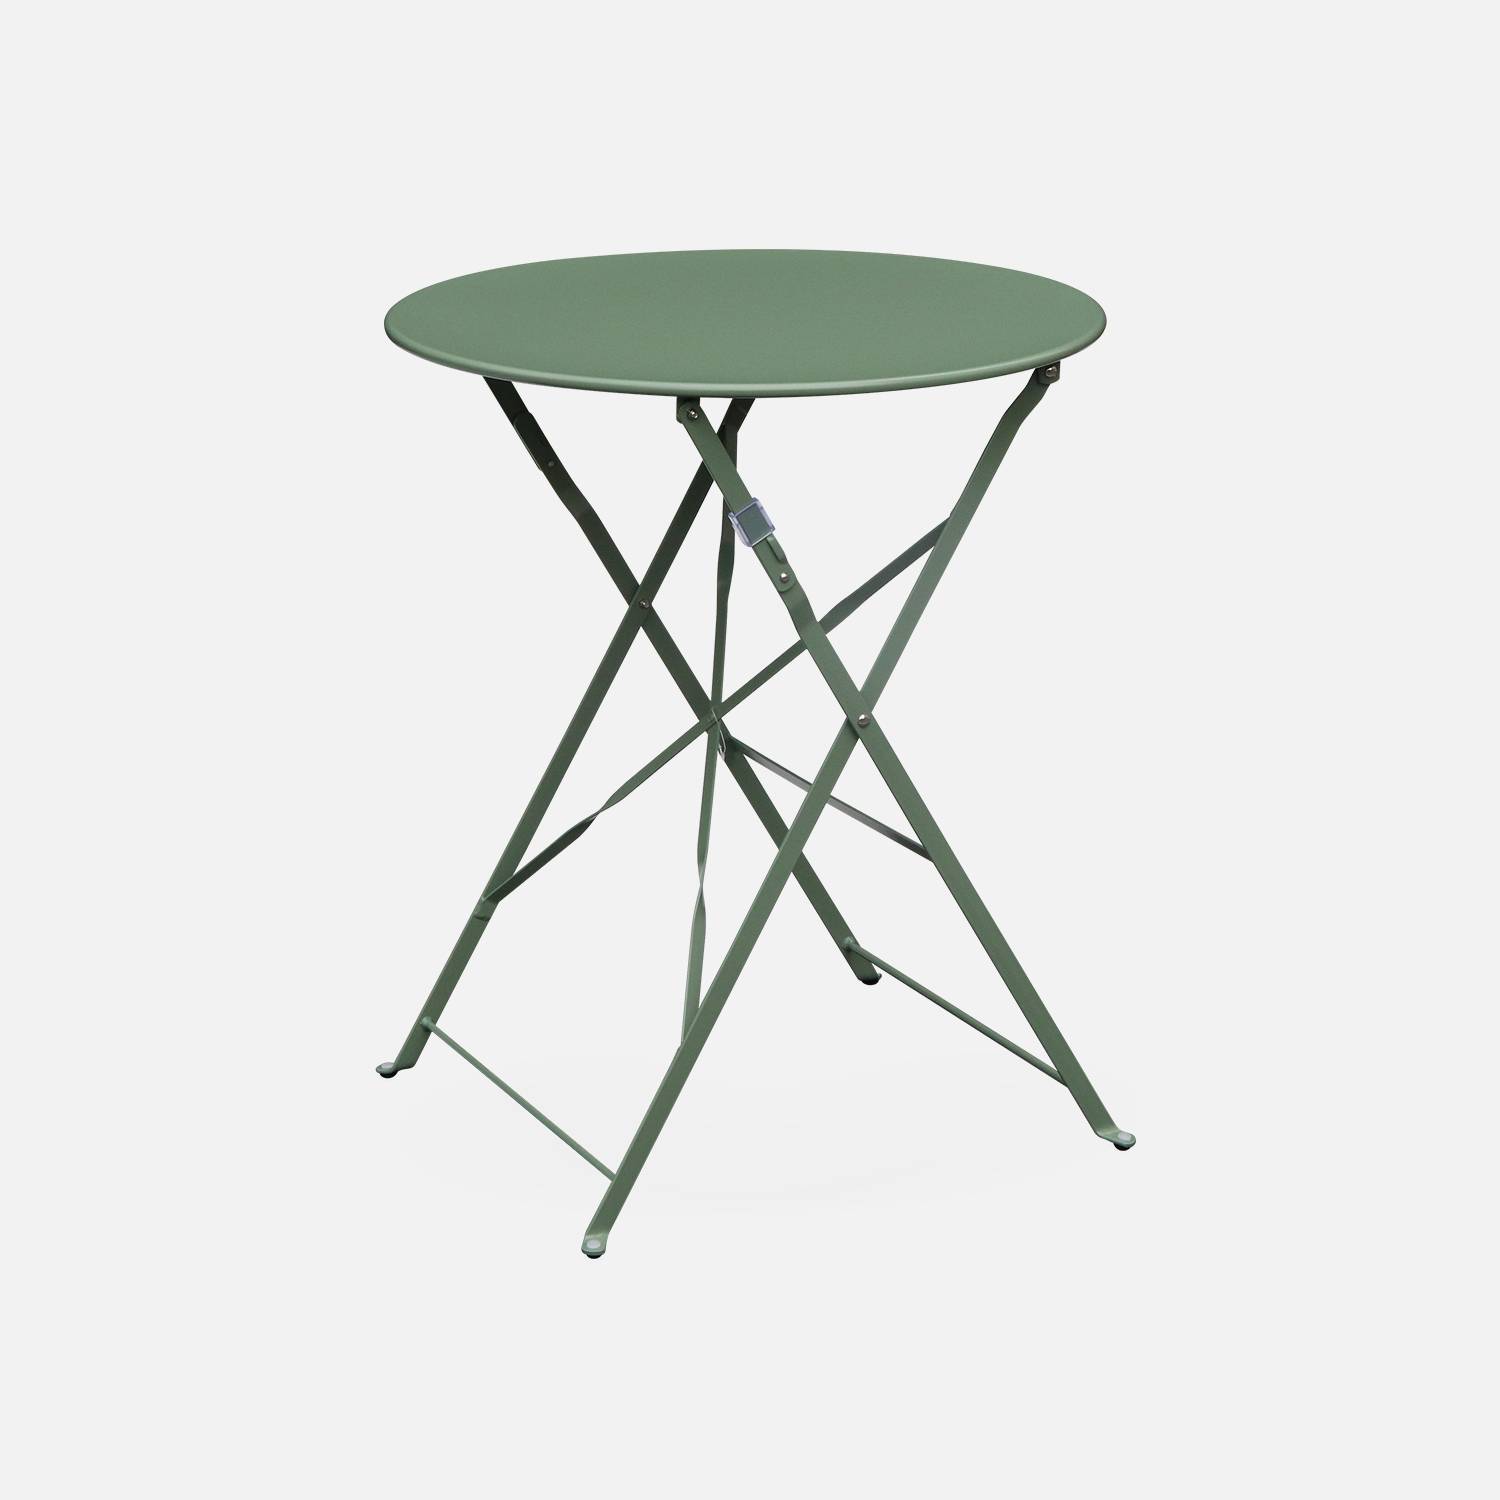 Foldable bistro garden table - Round Emilia sage green - Round table Ø60cm, thermo-lacquered steel | sweeek